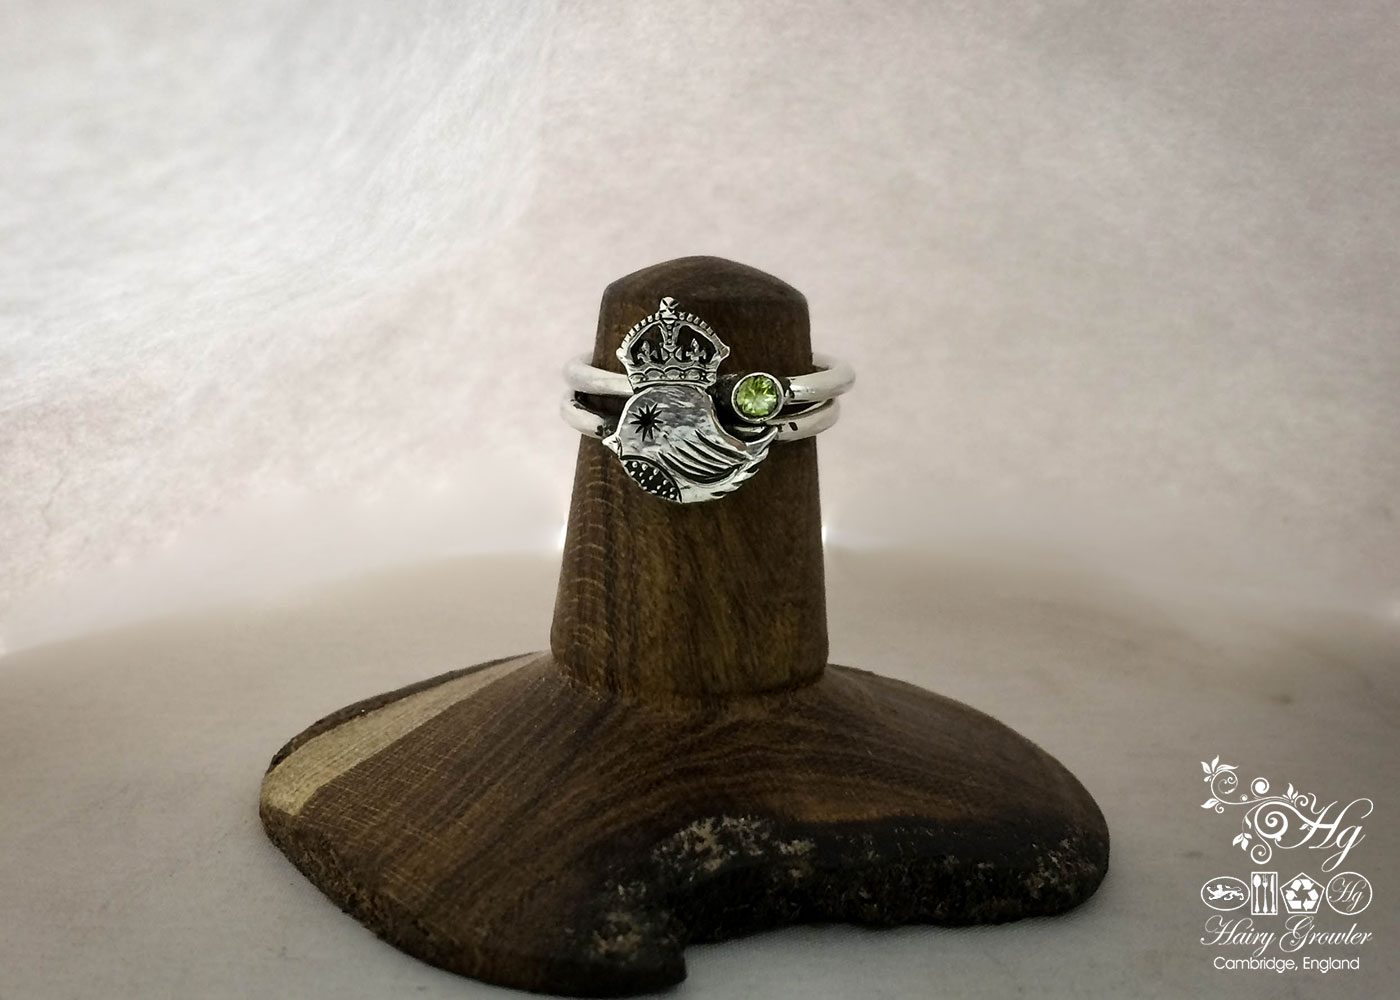 The 'teeny weeny bird queen' recycled silver threepence coin ring. Handmade and upcycled silver bird ring